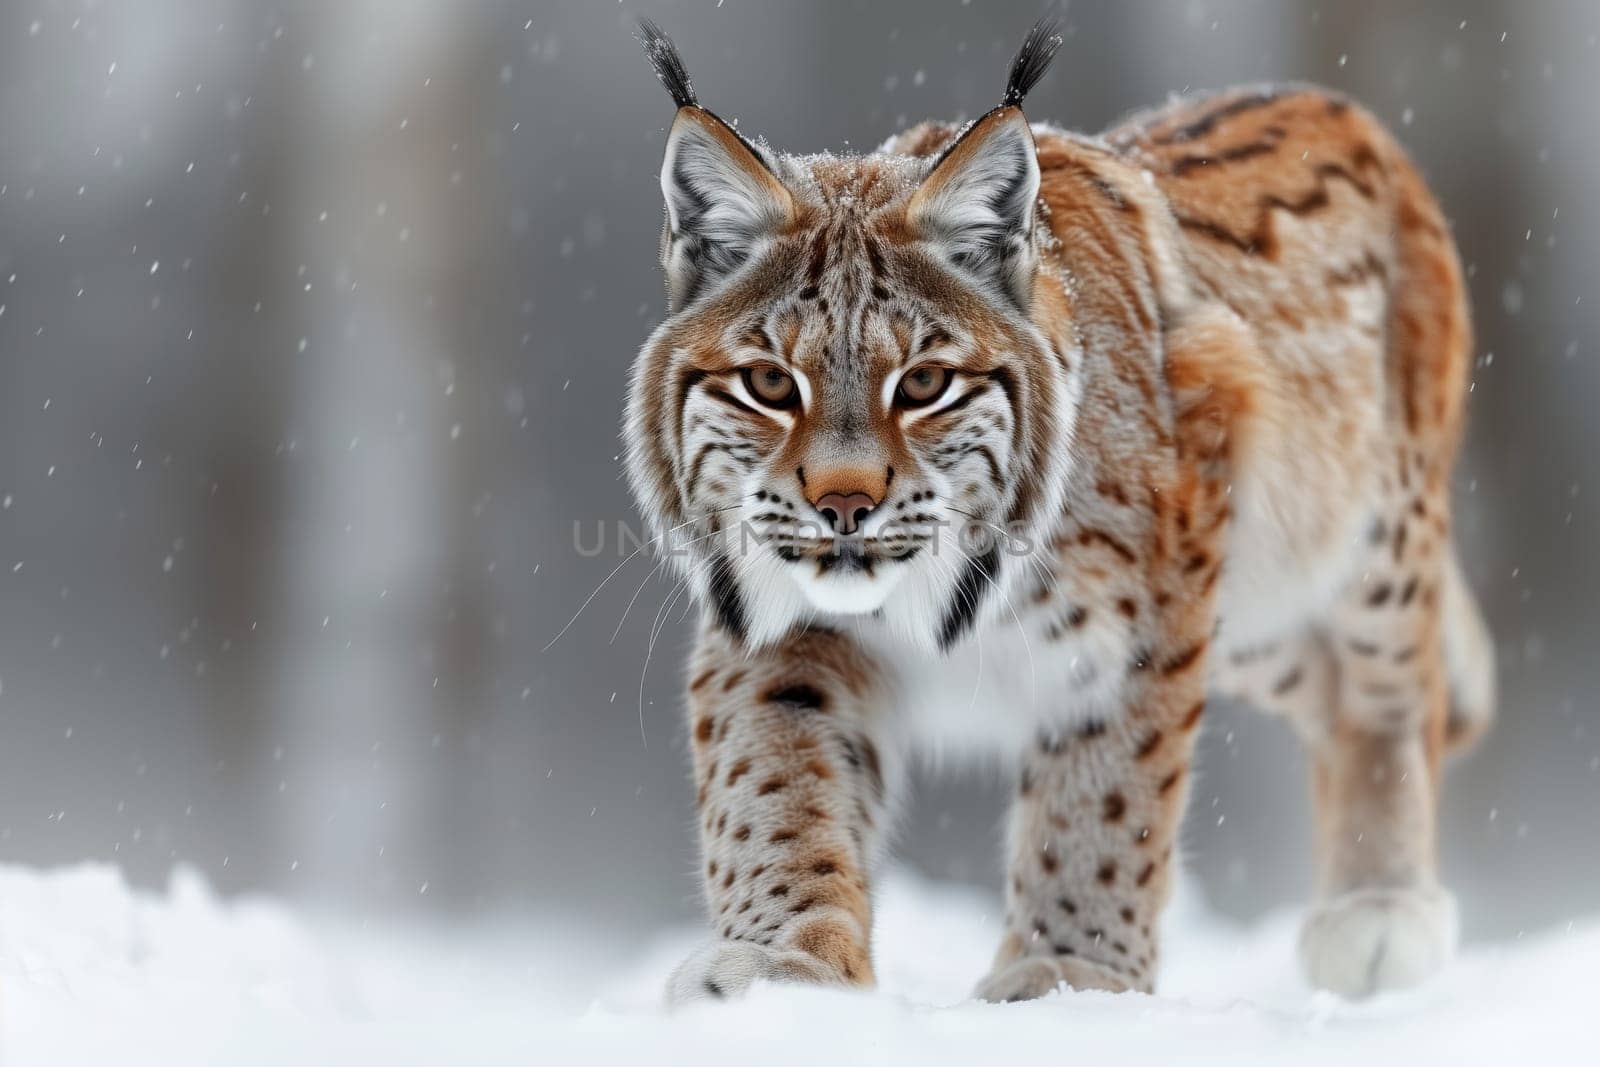 A Felidae carnivore, the lynx, with its distinctive whiskers, is a small to mediumsized cat standing in the snow, gazing at the camera with its intense eyes